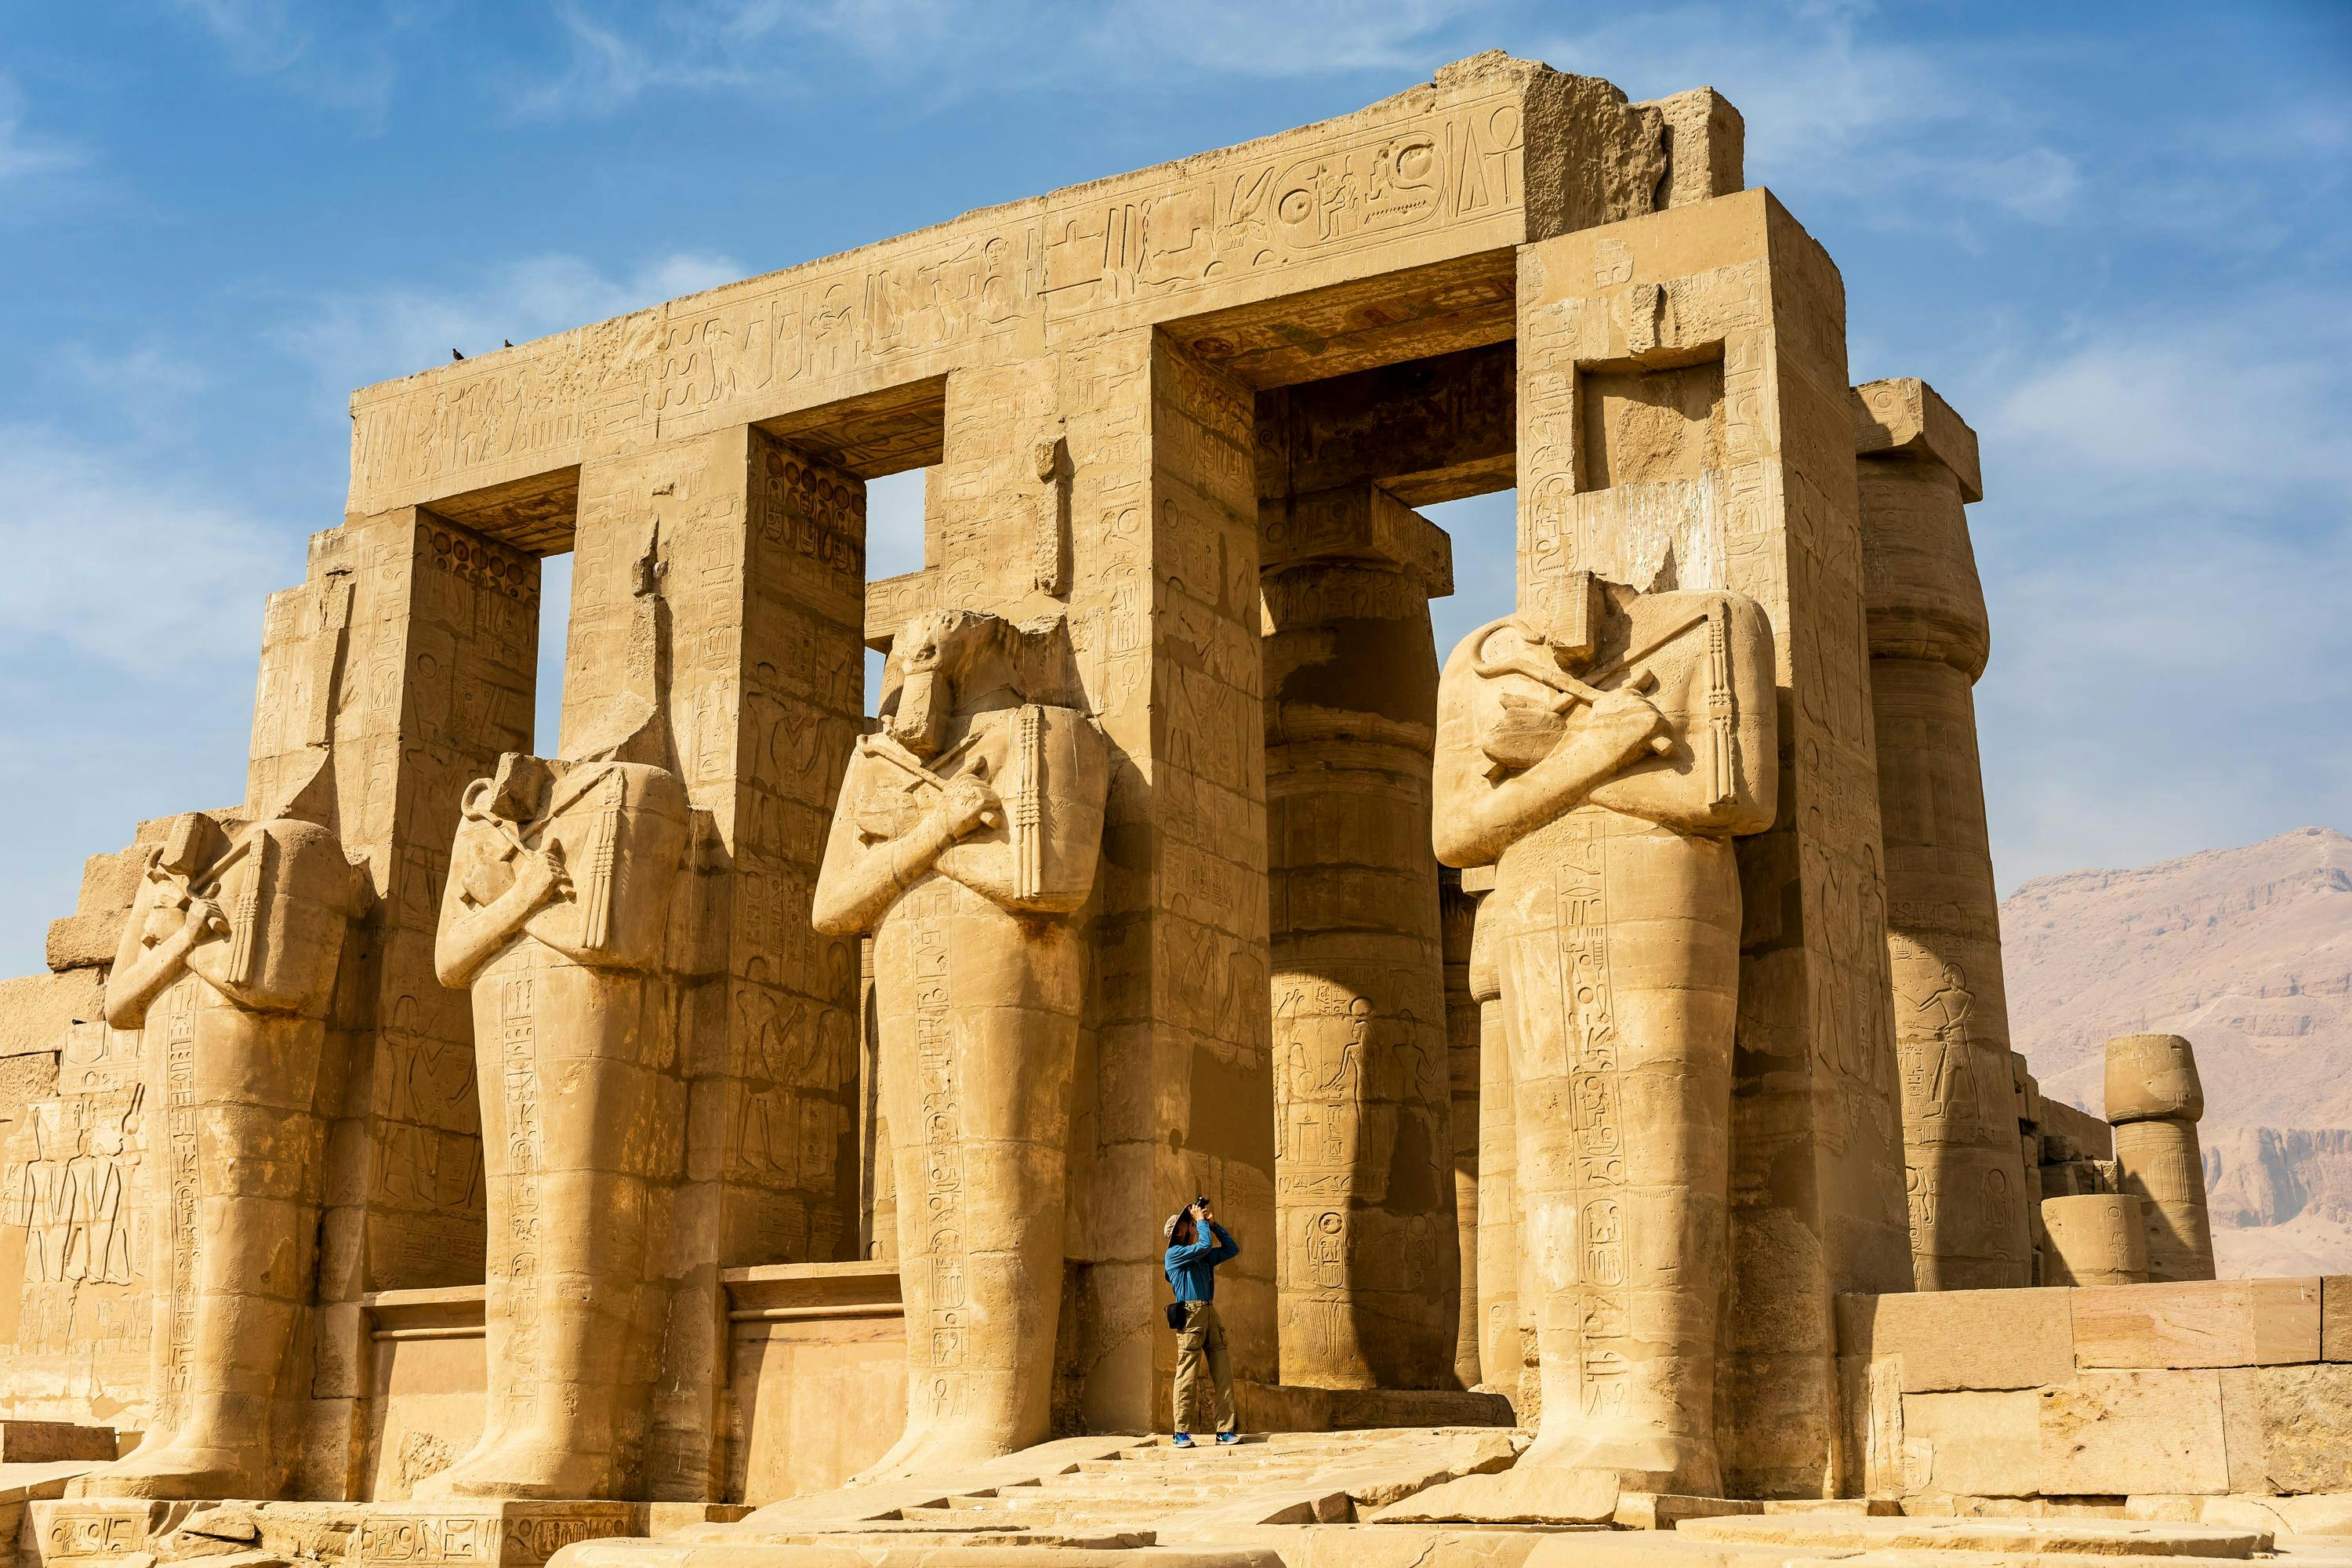 Ramesseum Temple, Luxor, UNESCO World Heritage site, Nile River Valley, Luxor, Luxor Governorate, Egypt.